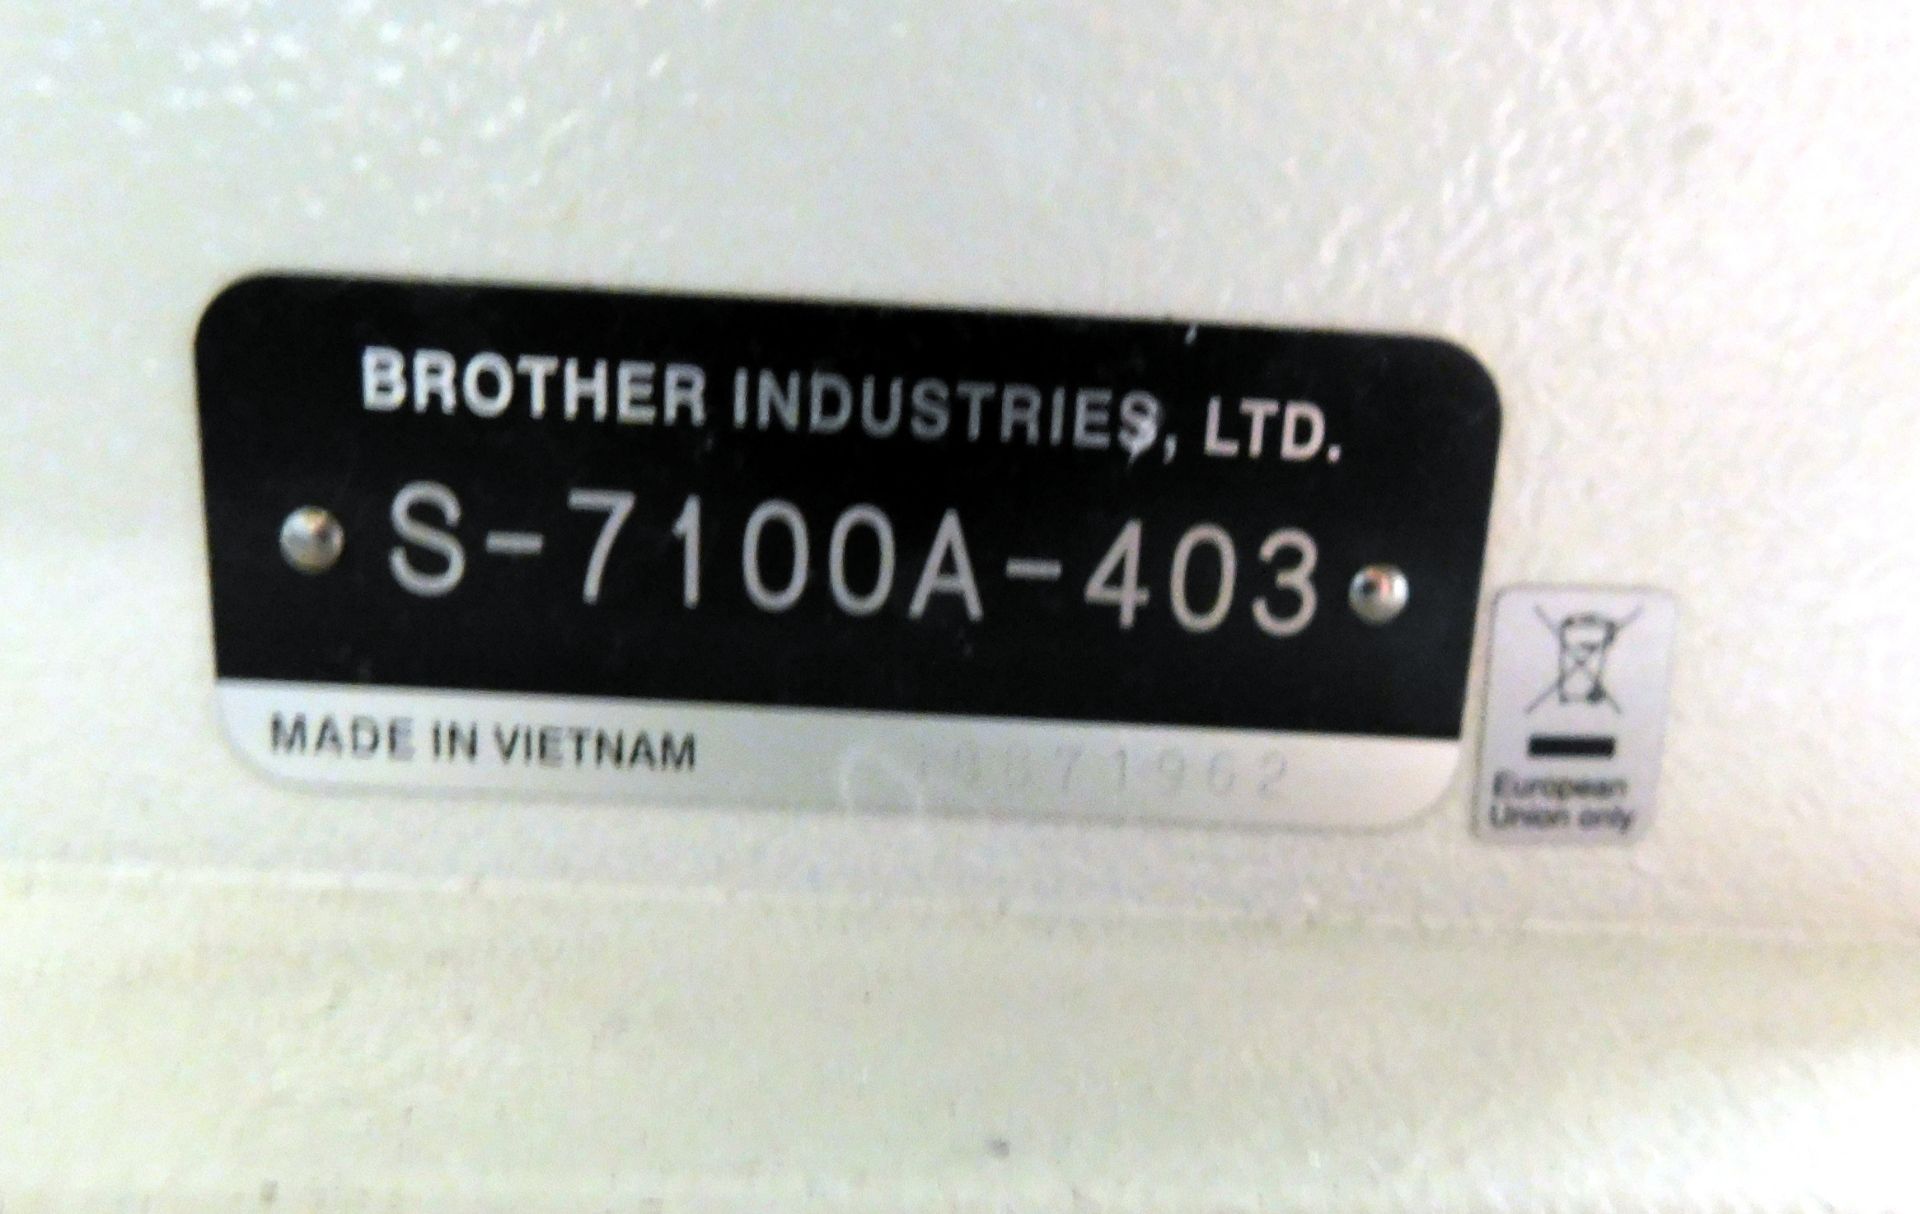 Brother S-7100 A-403 Single Needle Lockstitch Machine, Serial Number J8871962, Single Phase ( - Image 3 of 3